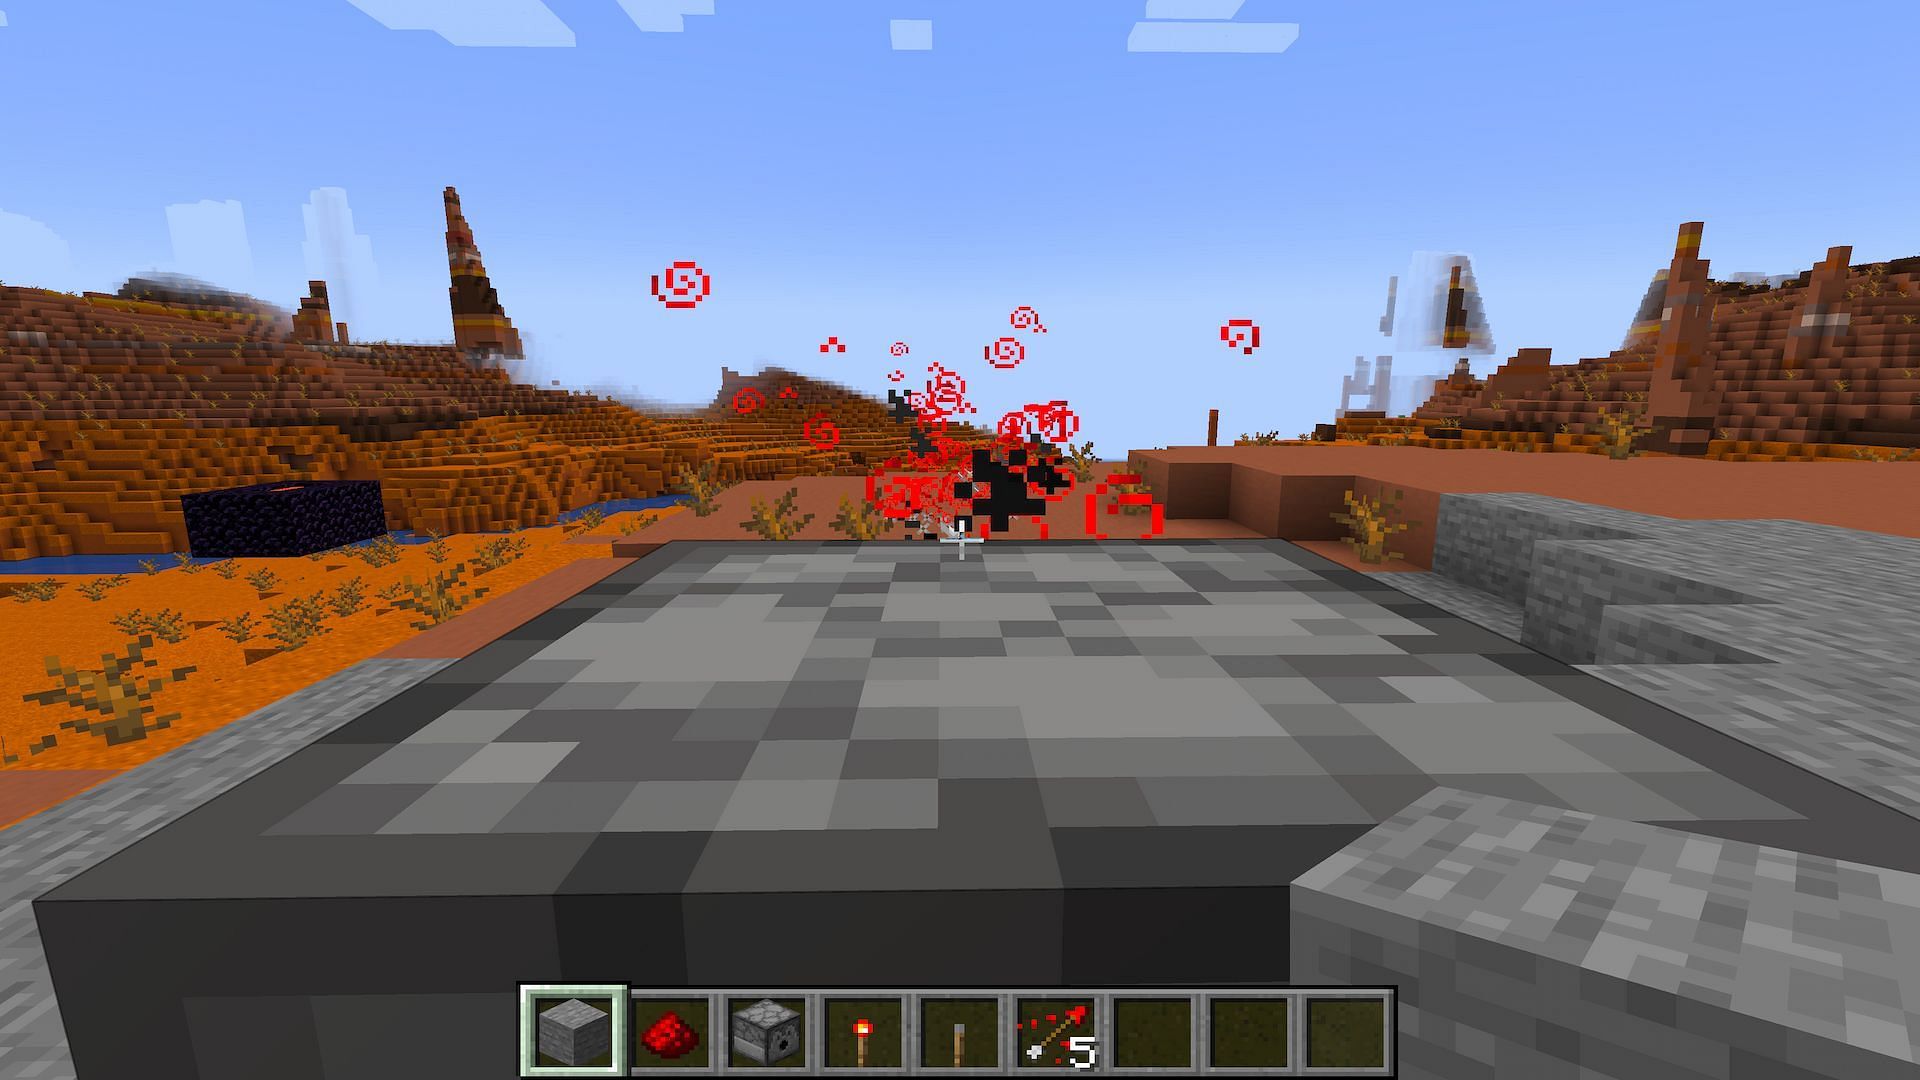 Players can fire lots of items with the dispenser, including fire charges and even spawn eggs (Image via Minecraft)